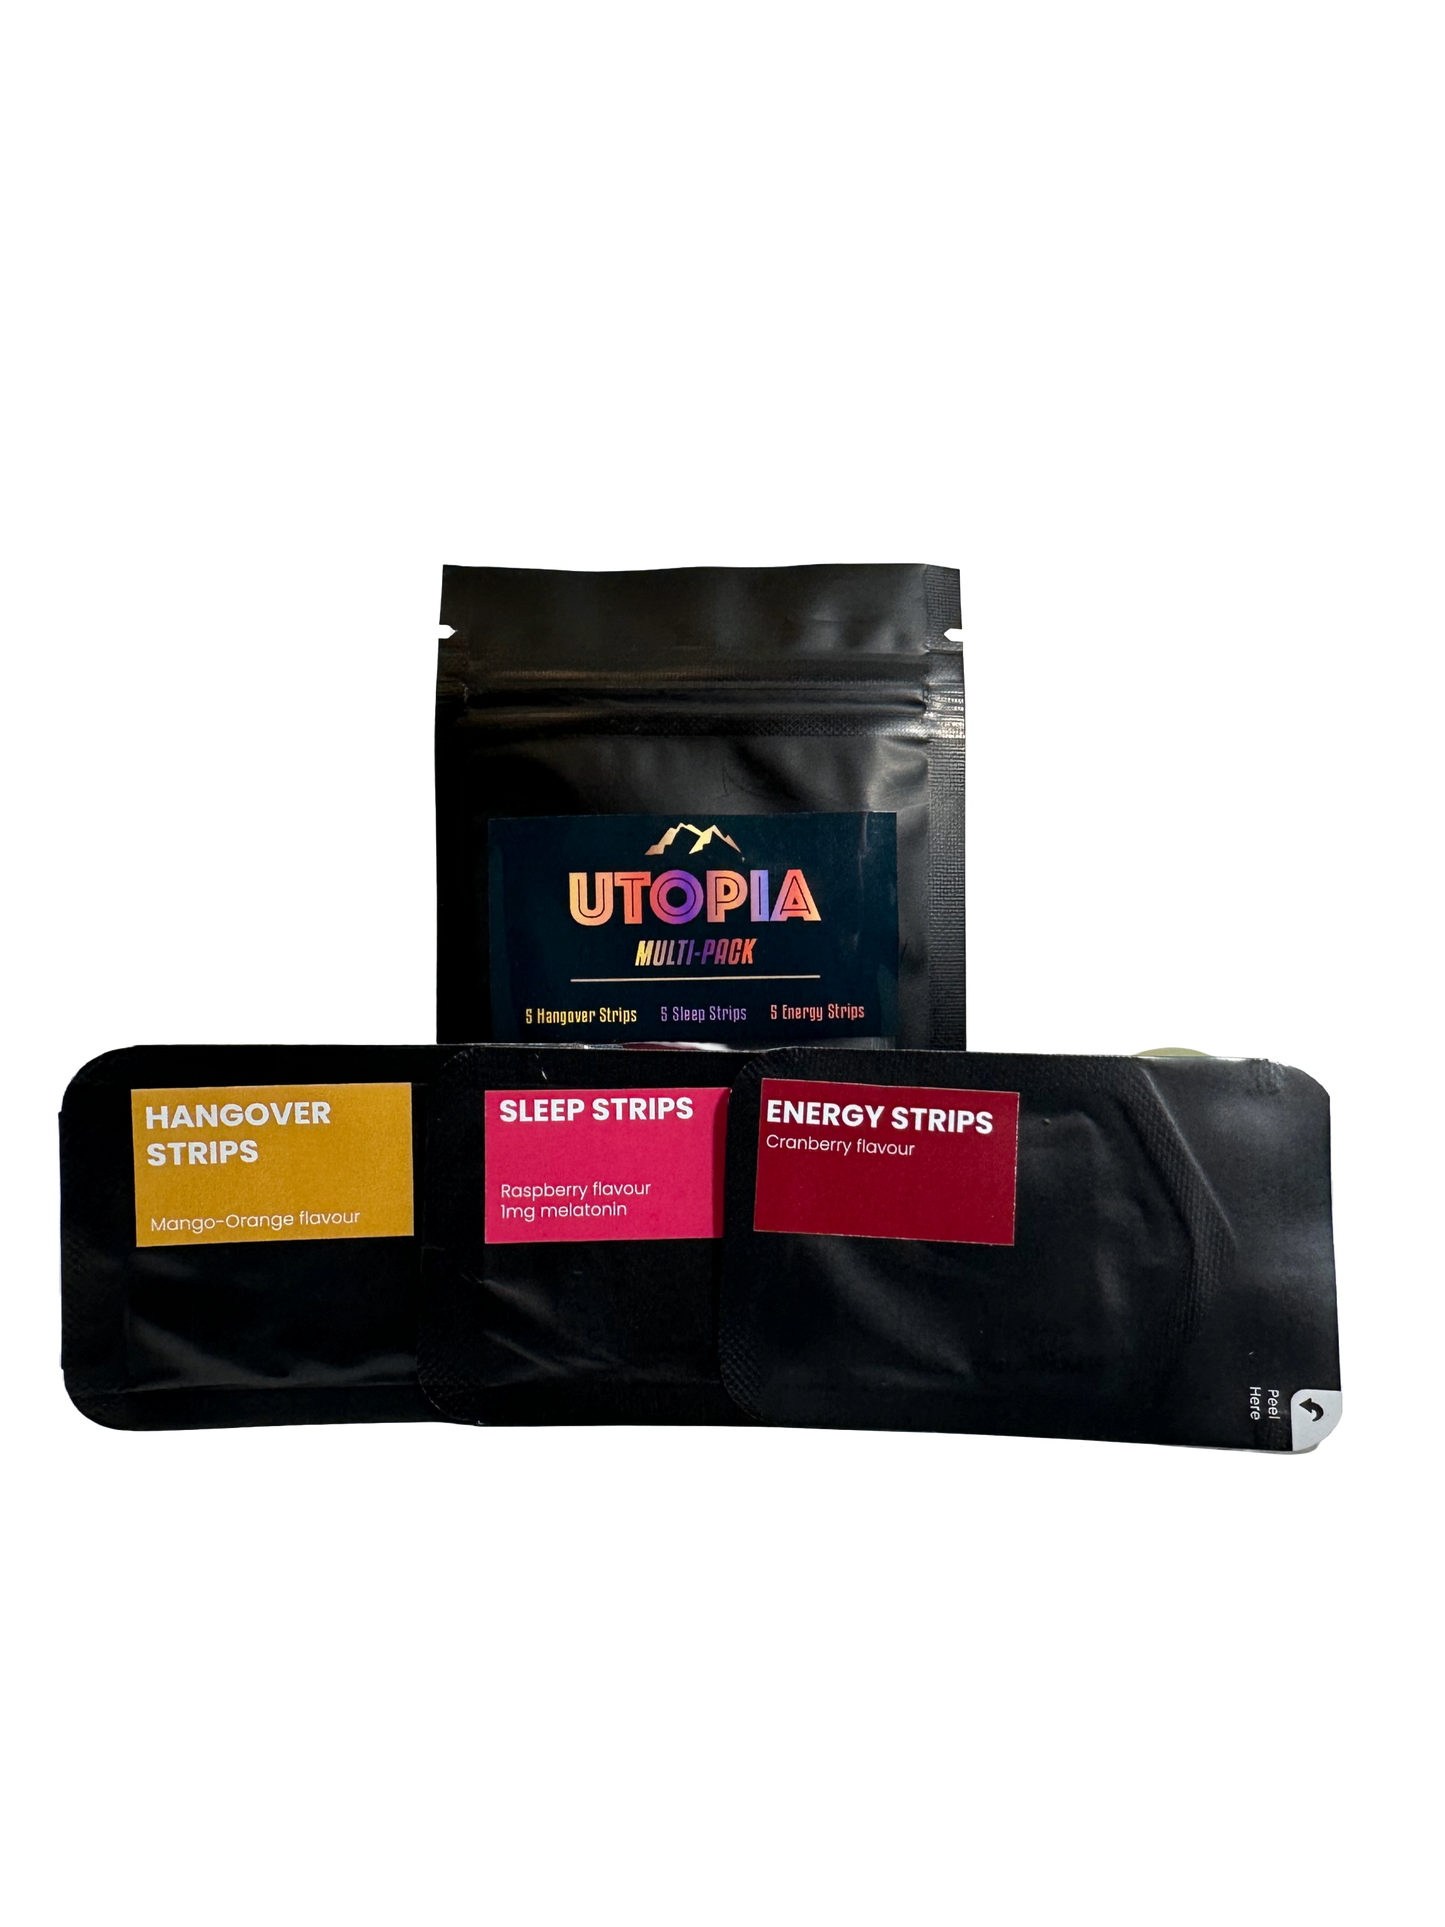 Utopia Multi Pack - (15 Count) - 5 Instant Energy Strips, 5 Hangover Prevention Strips, & 5 Sleep Well Strips - All Natural Solutions to Hangovers, Poor Sleep, & Low Energy